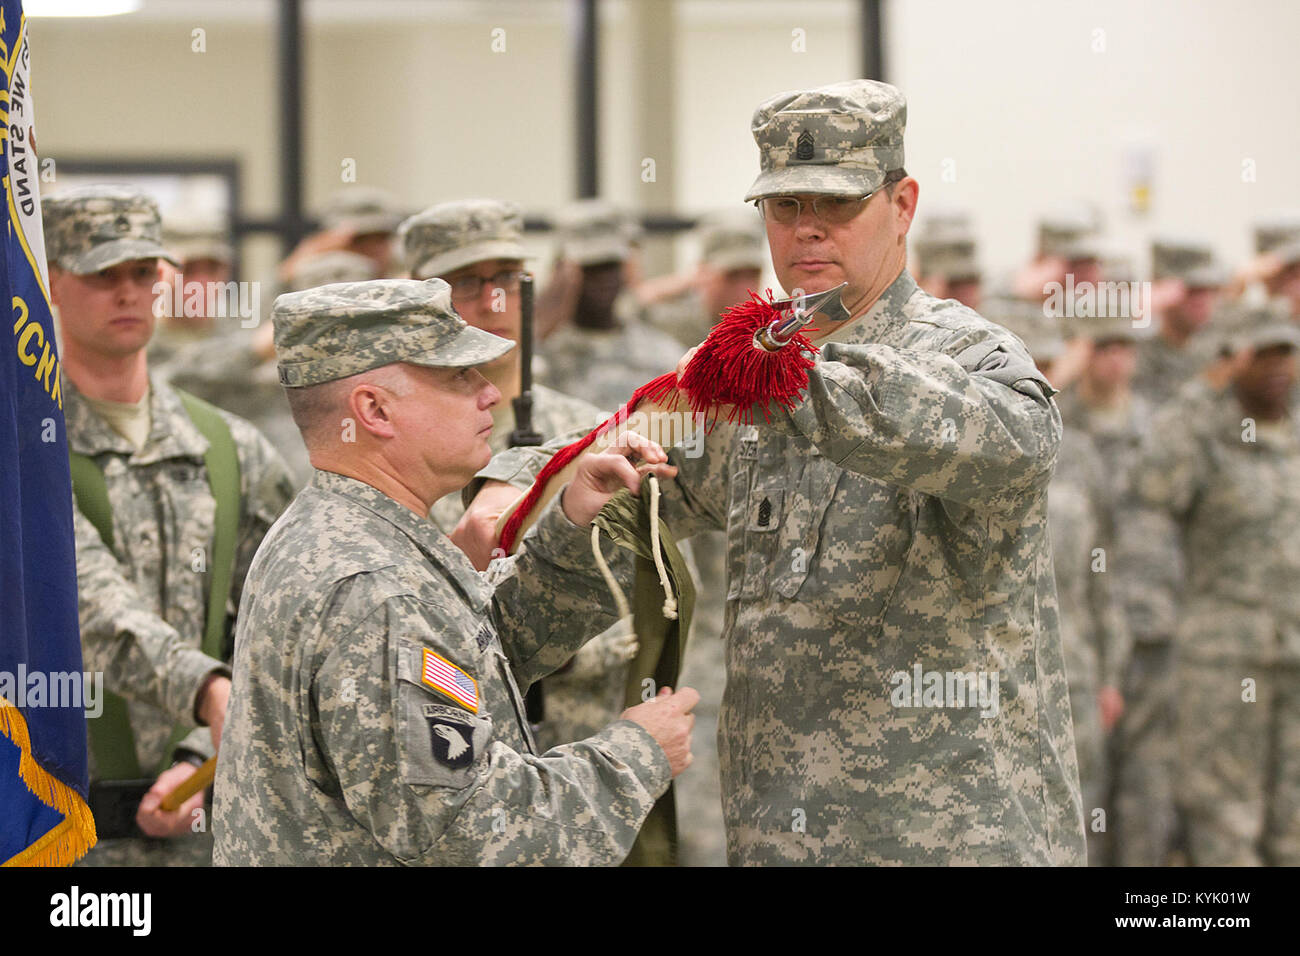 Lt. Col. Mark Brozak, commander of the 1204th Aviation Support Battalion furls the unit's colors with help from Command Sgt. Maj. Foster during an inactivation ceremony in Burlington, Ky., Jan. 10, 2016. (U.S. Army National Guard photo by Staff Sgt. Scott Raymond) Stock Photo